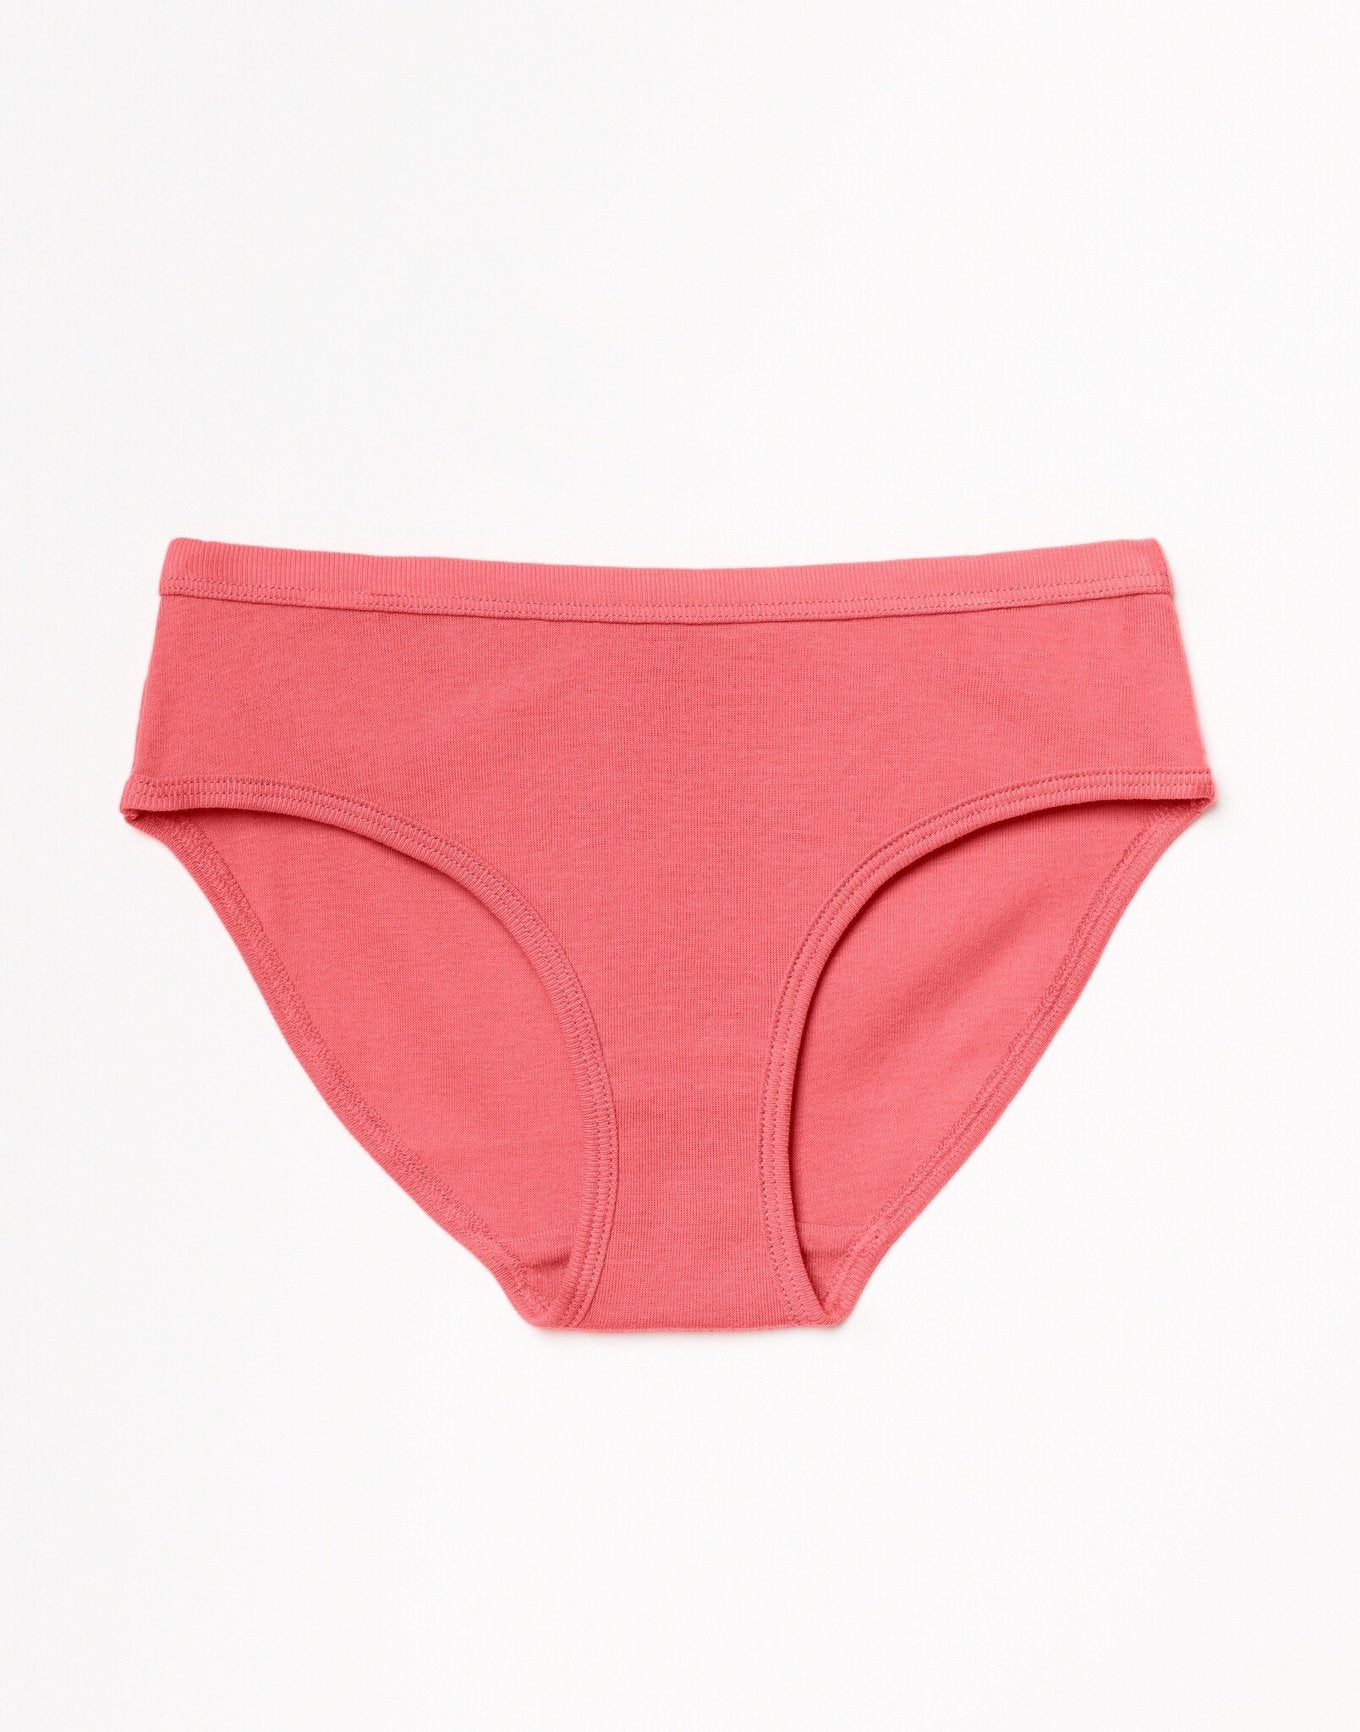 Outlines Kids Daisy in color Tea Rose and shape underwear